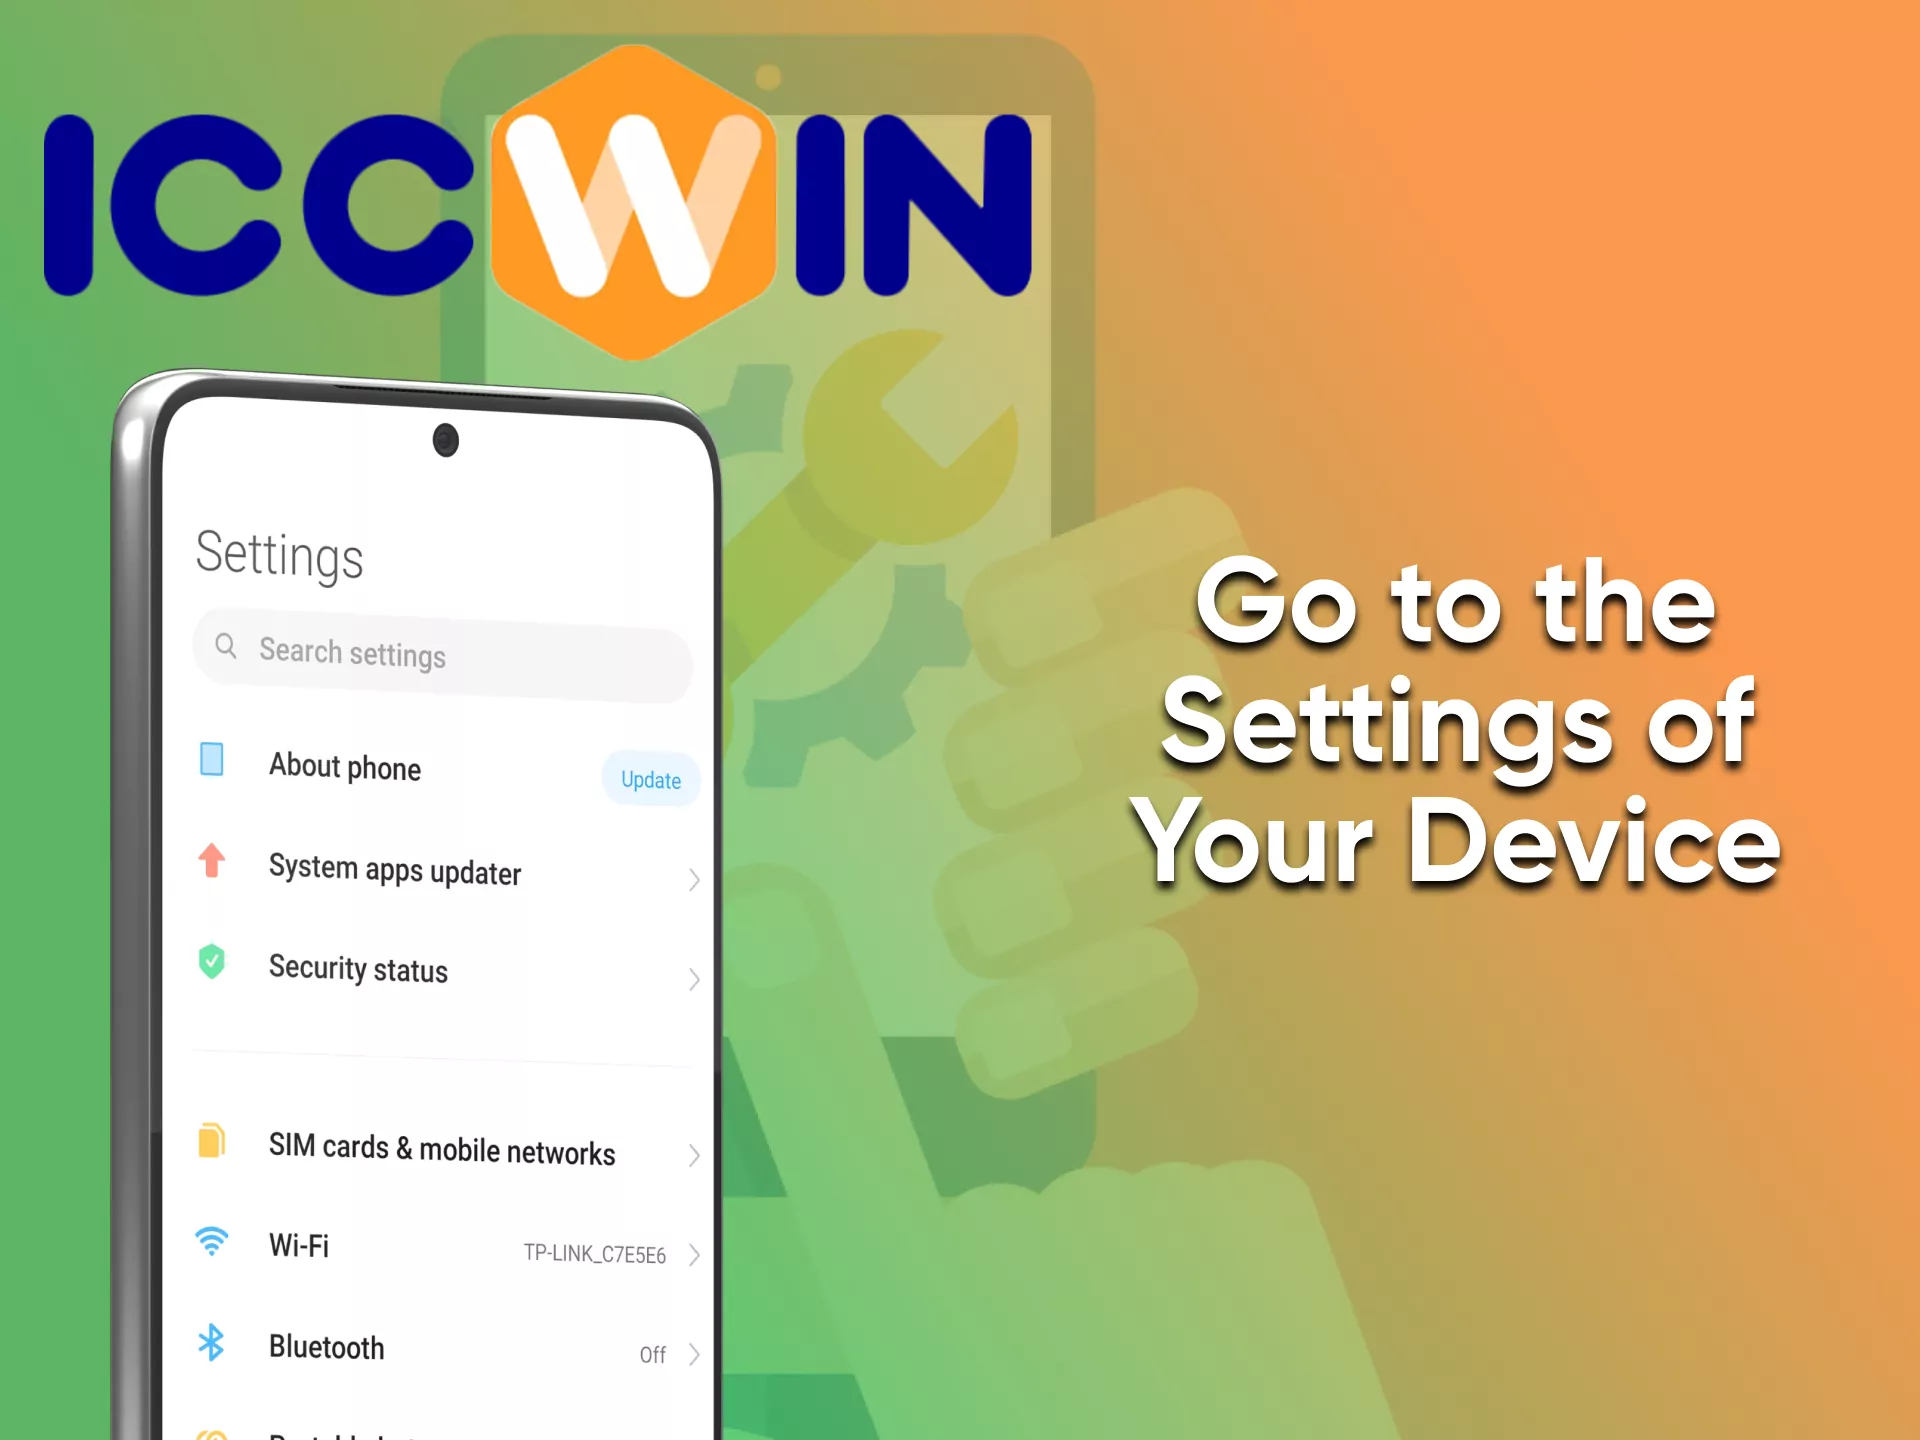 Download the application on your device from ICCWin.